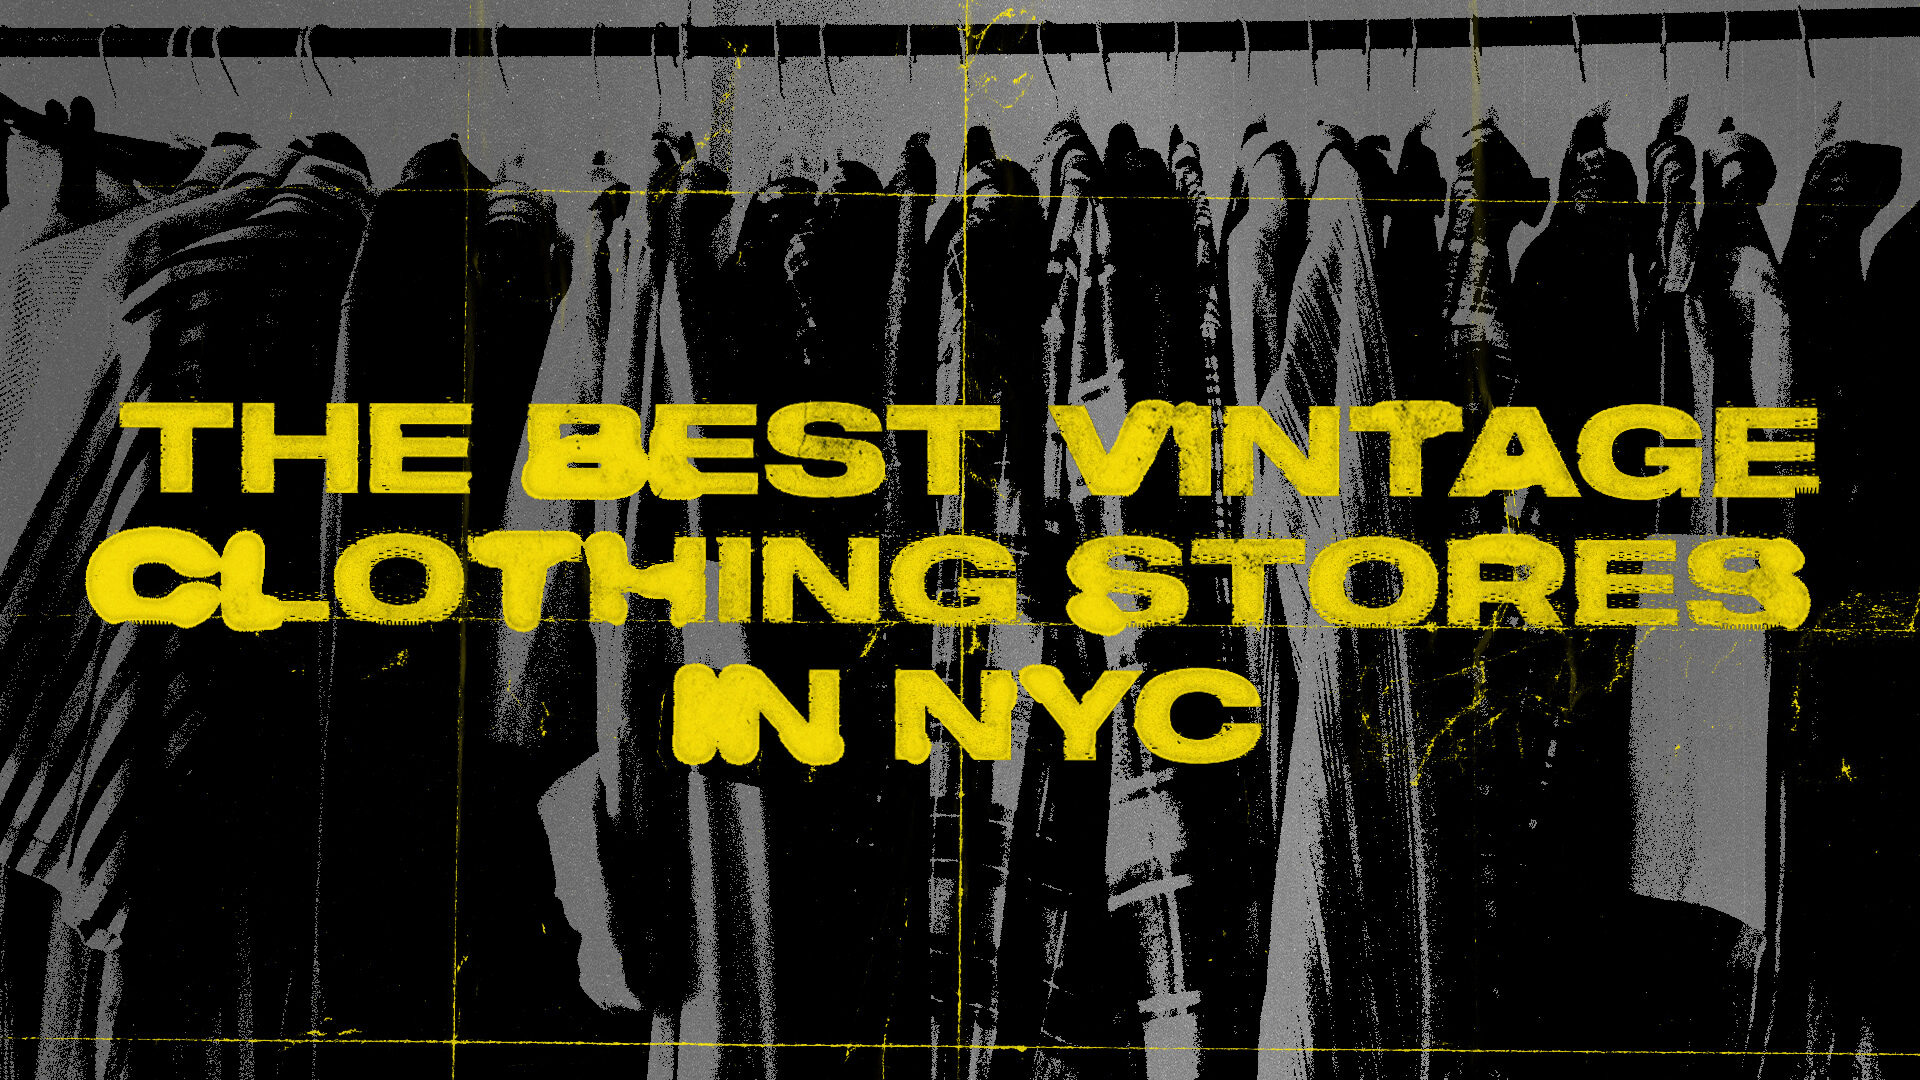 Complex · The Best Vintage Shops in NYC